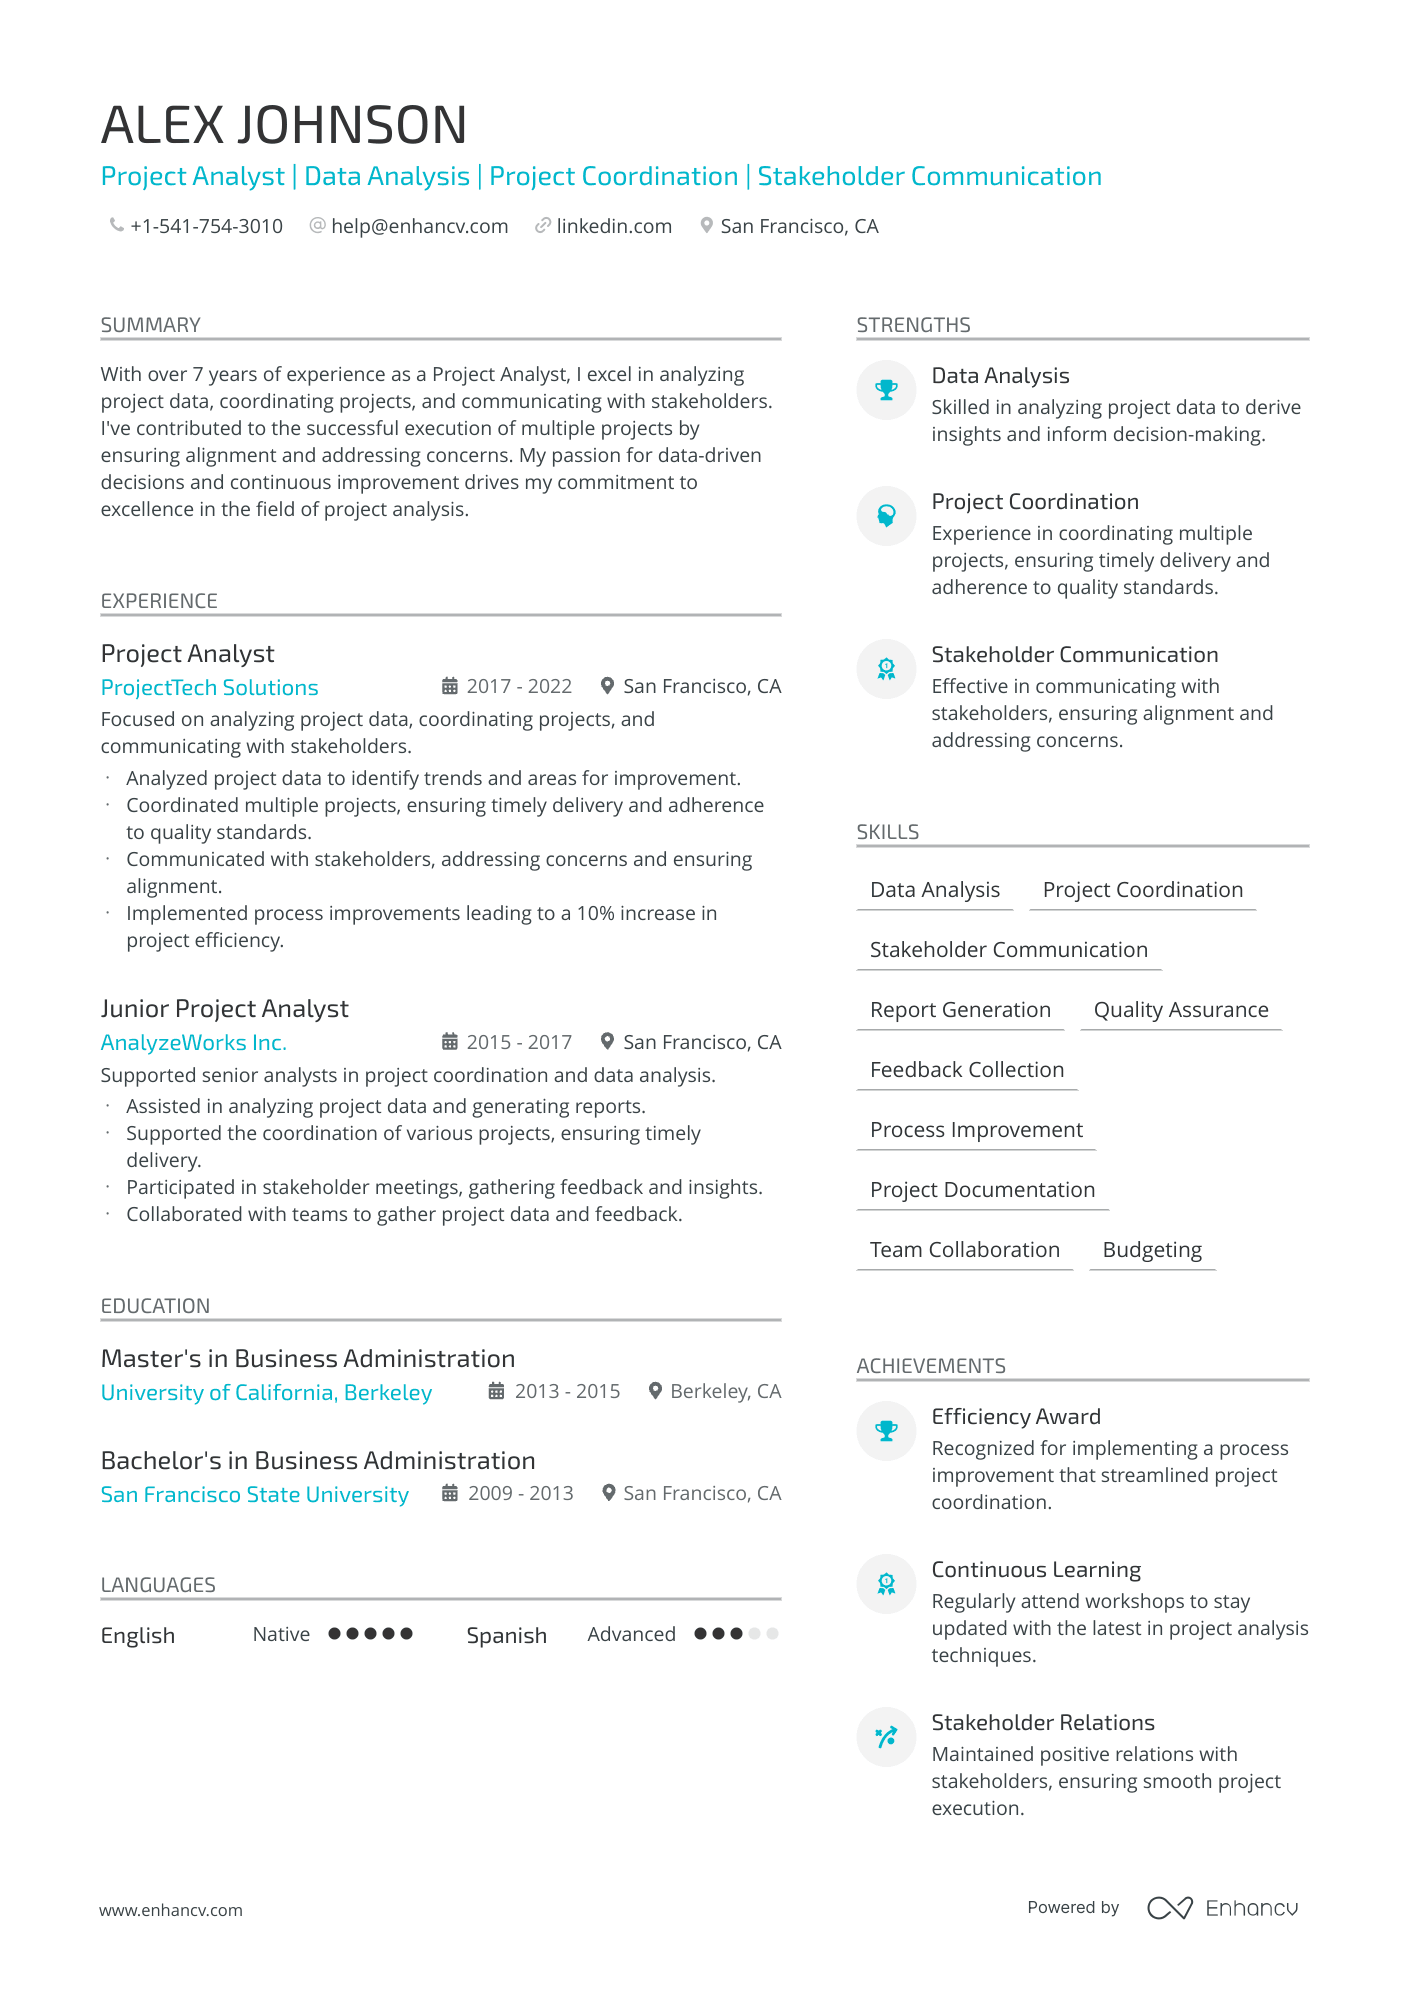 Project Analyst resume example